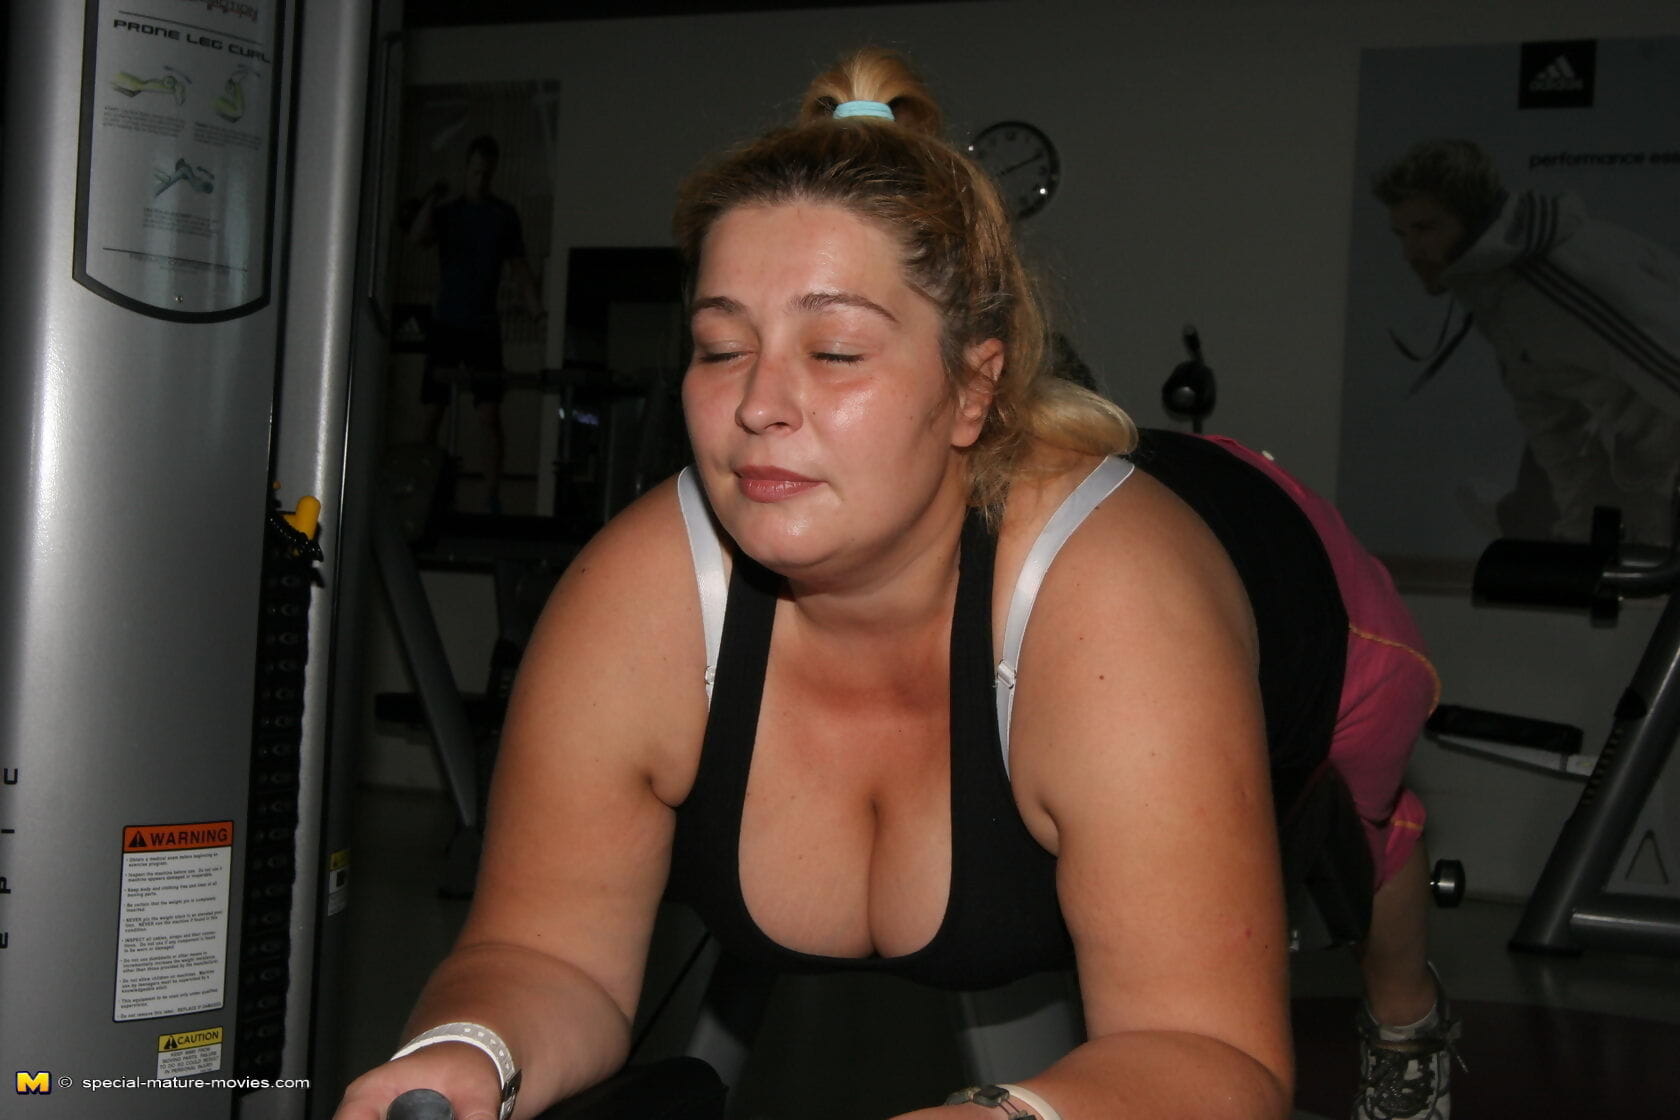 Mature women getting a workout during gym - part 1986 page 1